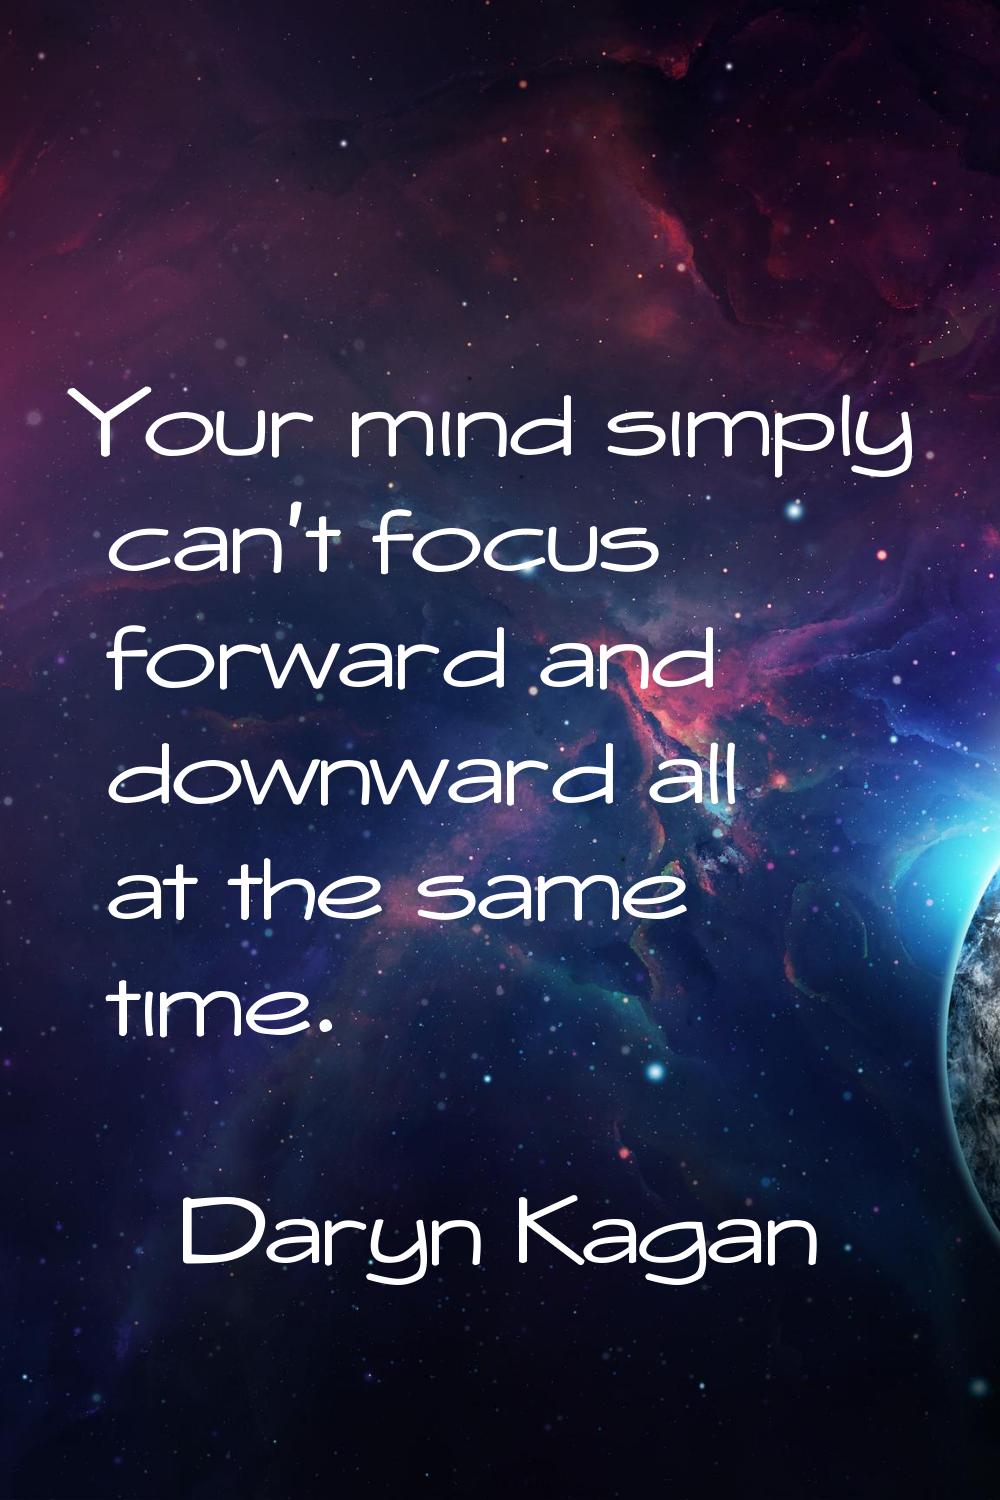 Your mind simply can't focus forward and downward all at the same time.